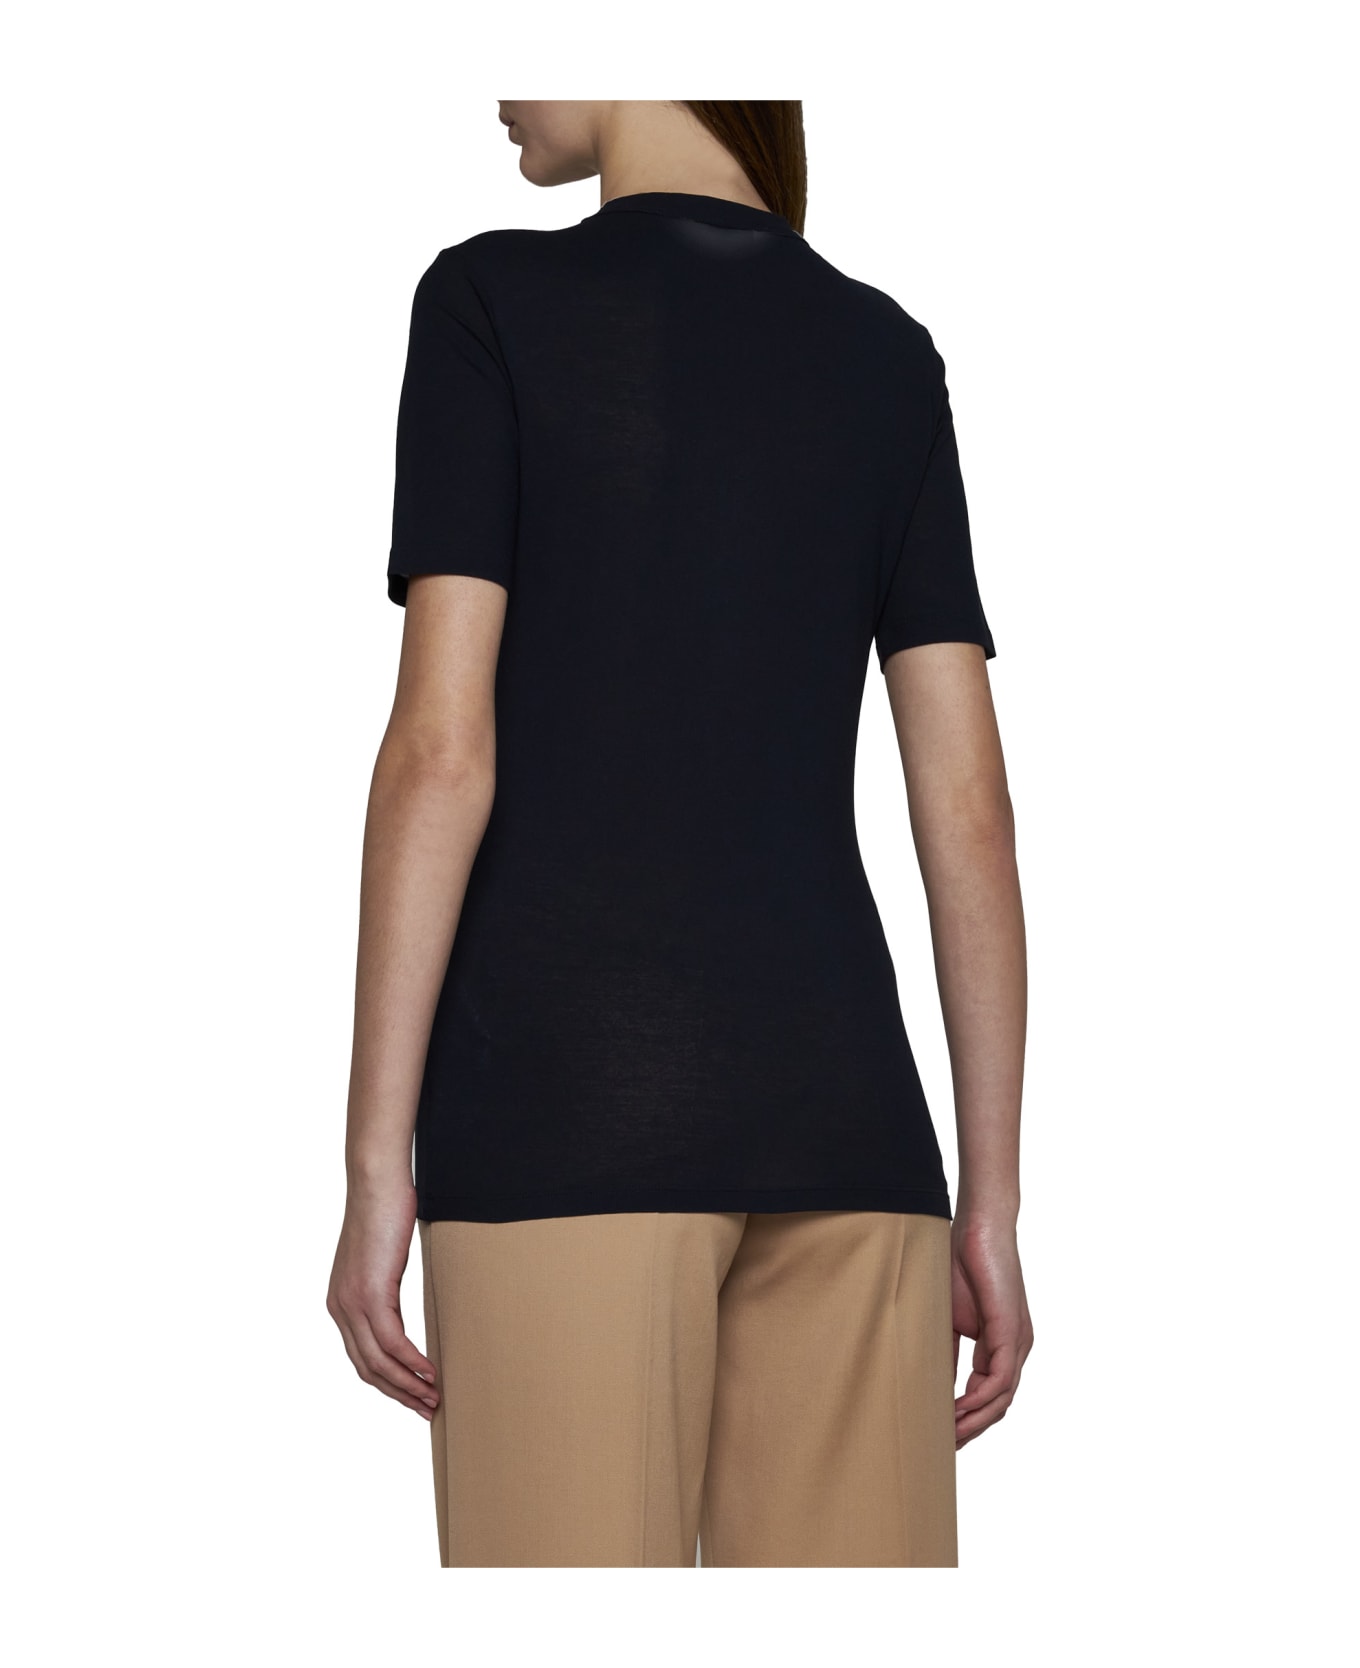 Jil Sander Night Blue Cotton Jersey Regular T-shirt By Ganni With Sleeve And Front Print. - Midnight Tシャツ